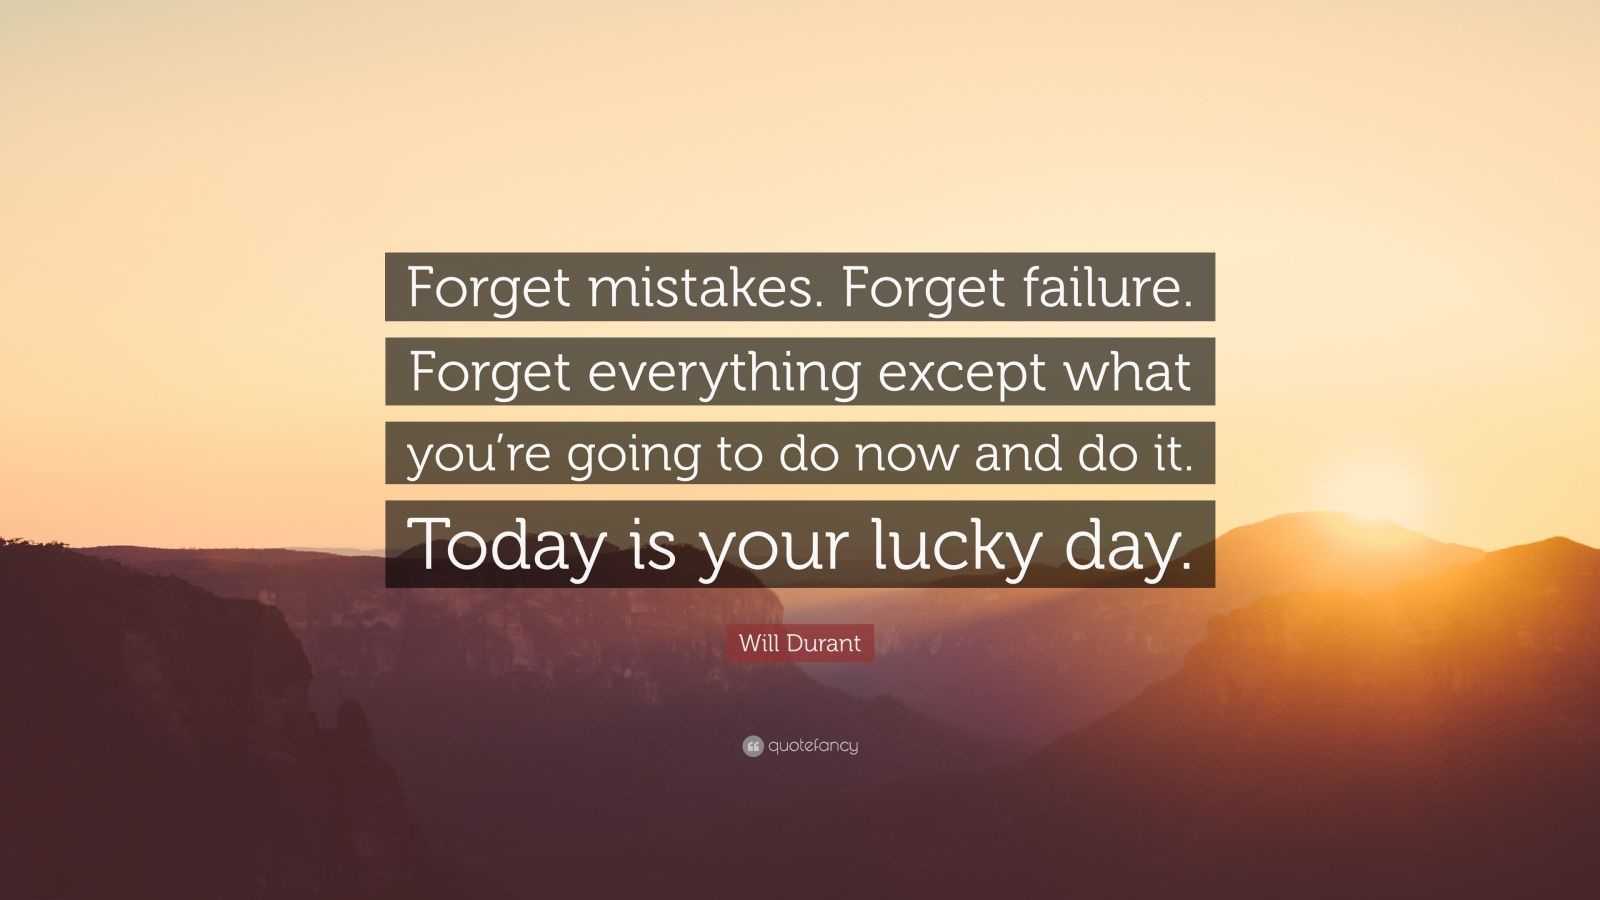 Will Durant Quote: “Forget mistakes. Forget failure. Forget everything ...